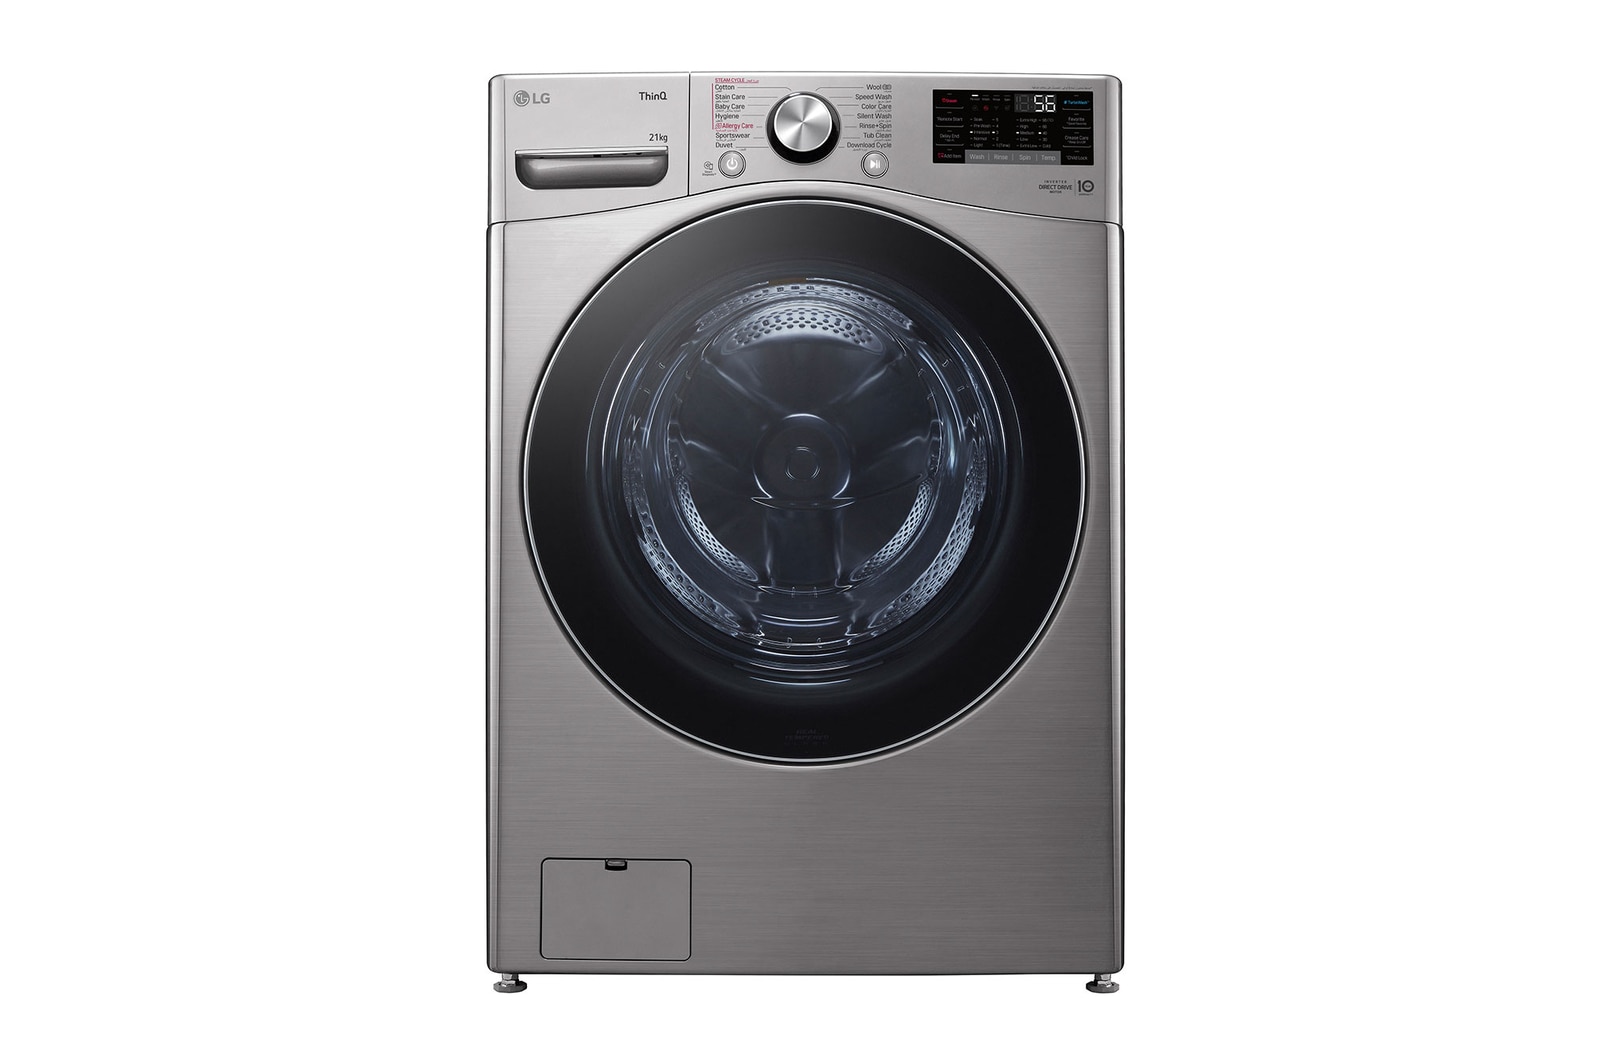 LG Front Load Washing Machine front view